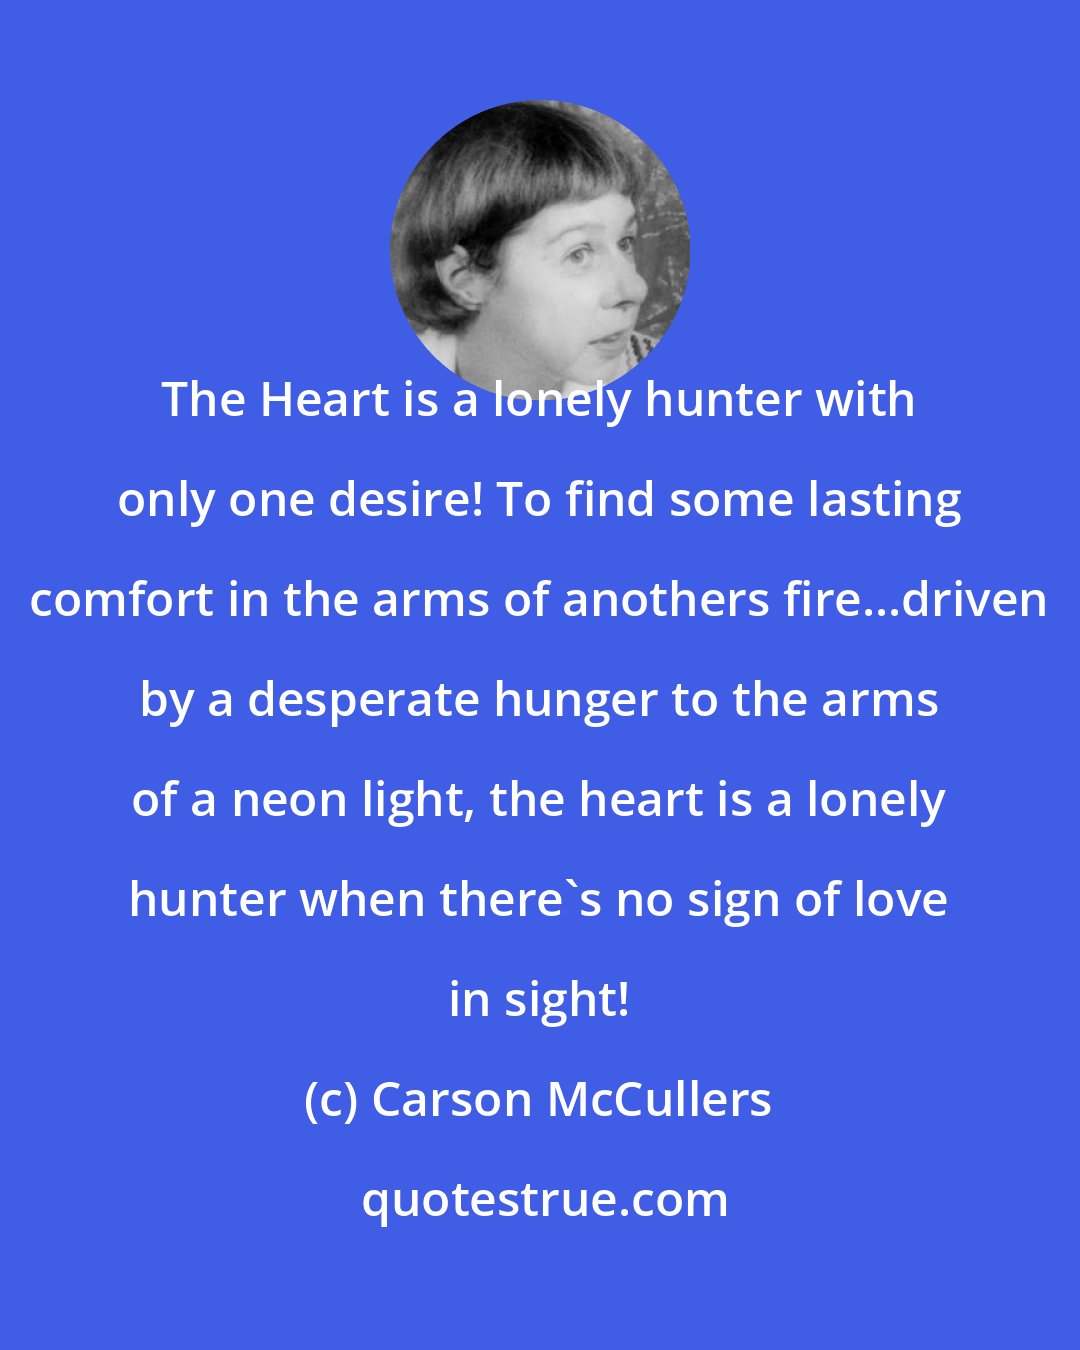 Carson McCullers: The Heart is a lonely hunter with only one desire! To find some lasting comfort in the arms of anothers fire...driven by a desperate hunger to the arms of a neon light, the heart is a lonely hunter when there's no sign of love in sight!